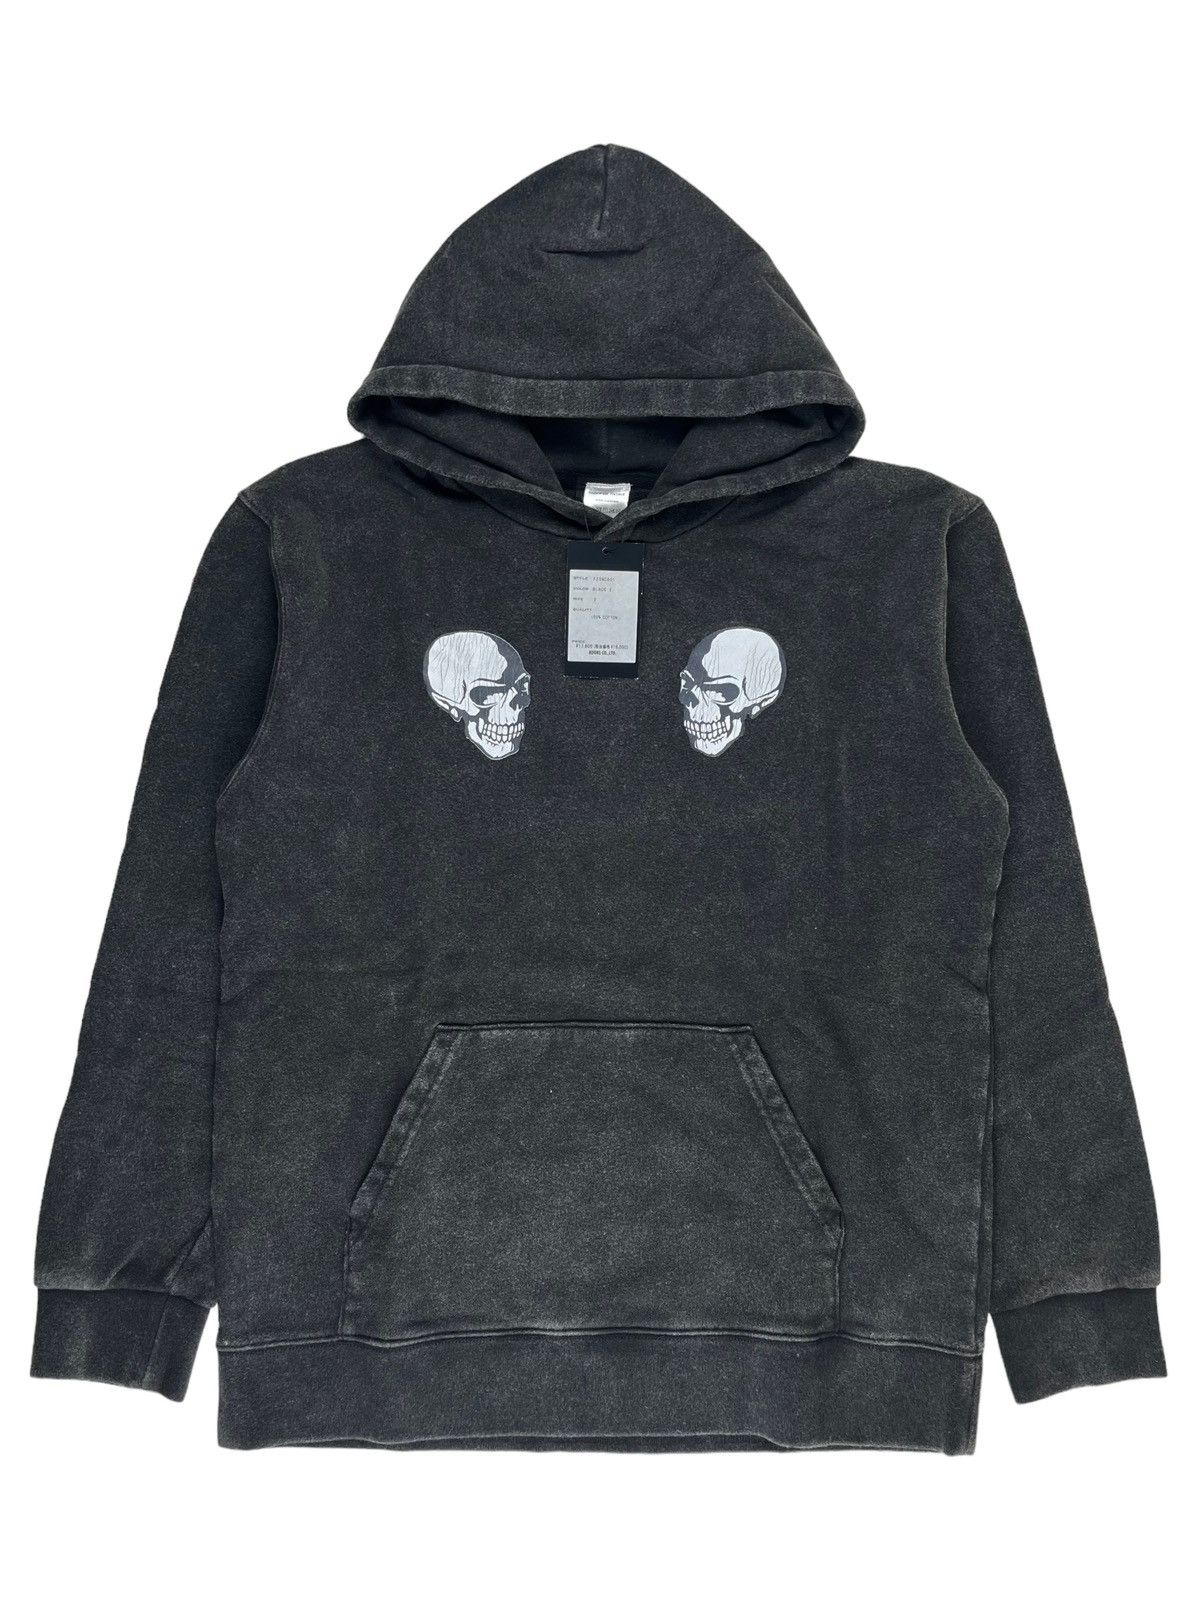 Hysteric Glamour STEAL!🔥 Hysteric Glamour x TOKYOVITAMIN Evil Woman Hoodie  | Grailed